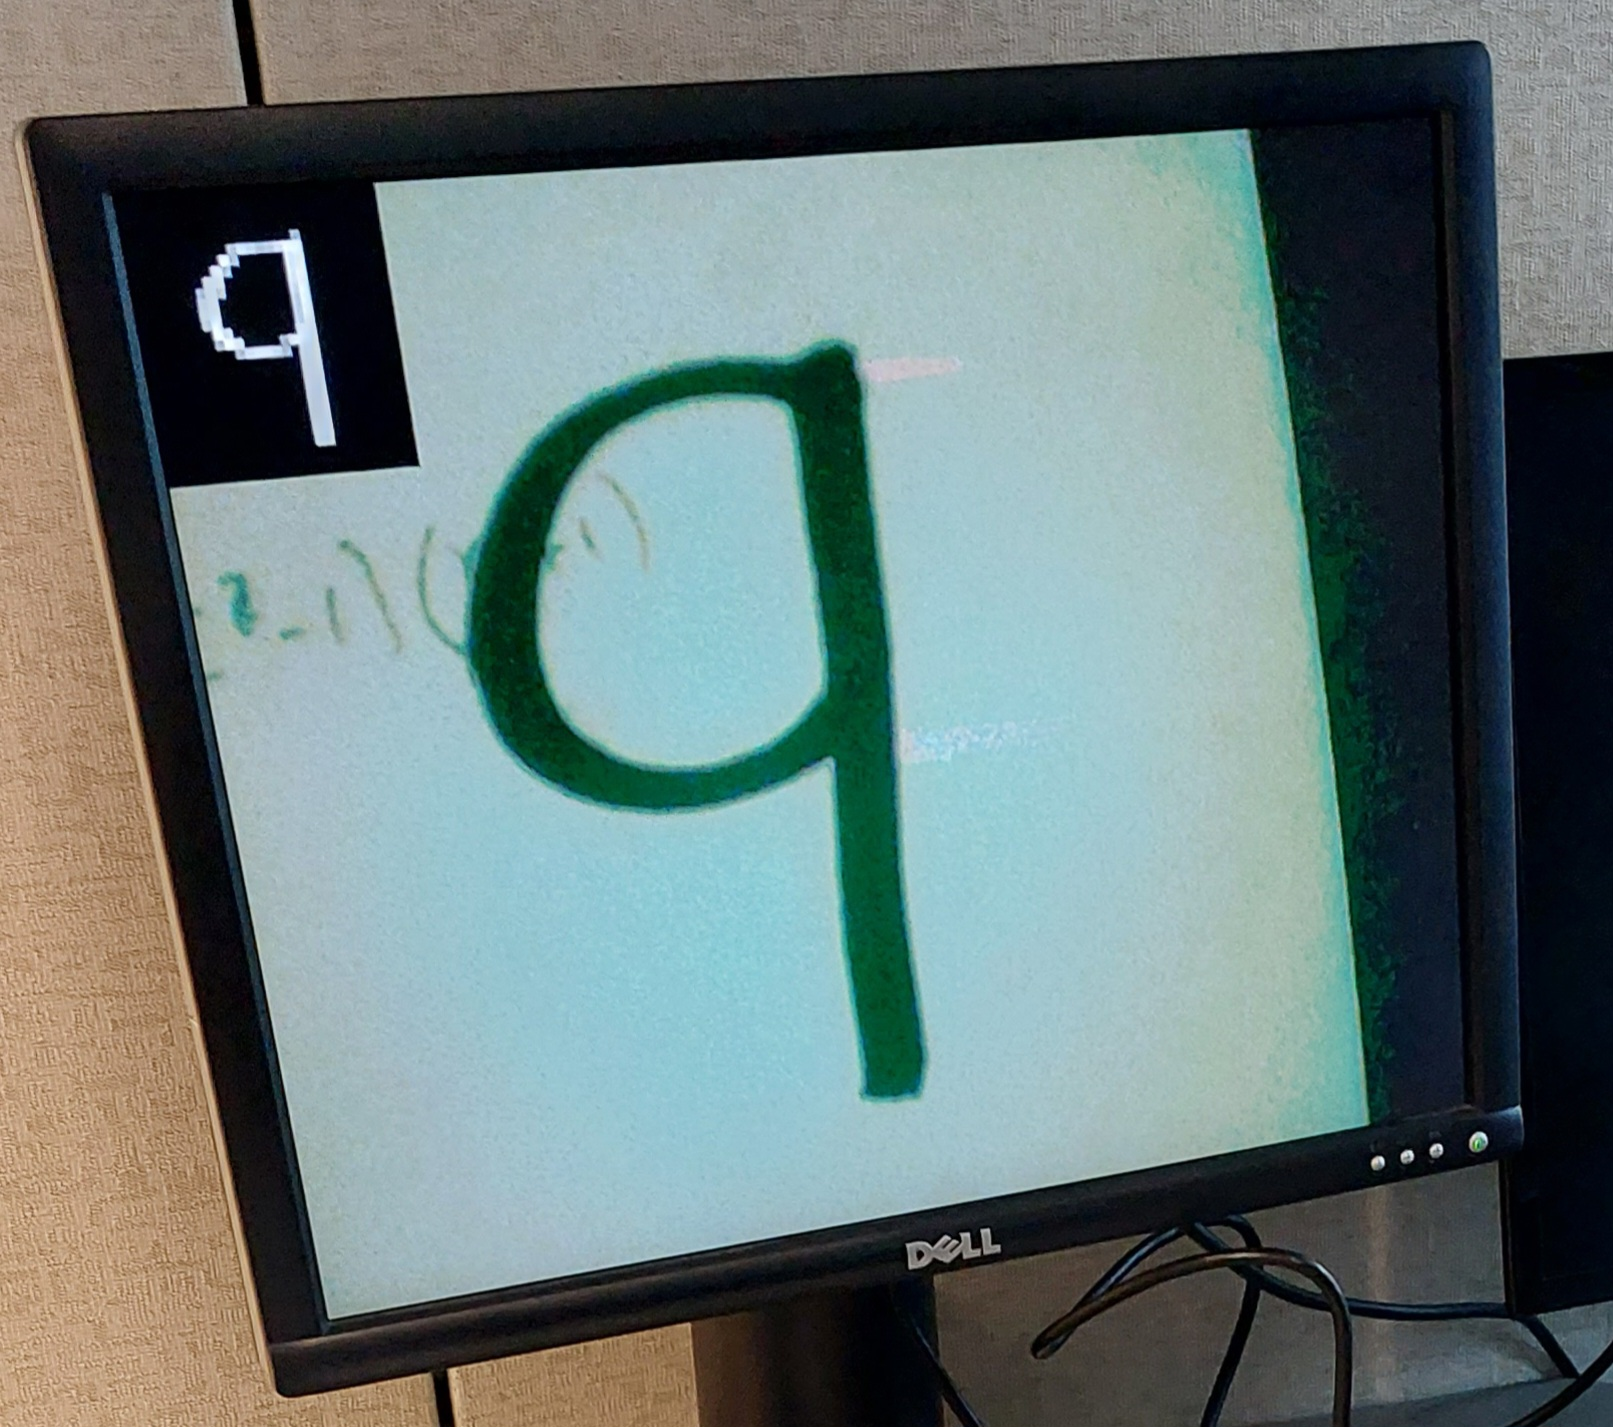 Live video feed of a digit, with a preview of the processed image used for recognition in the top left